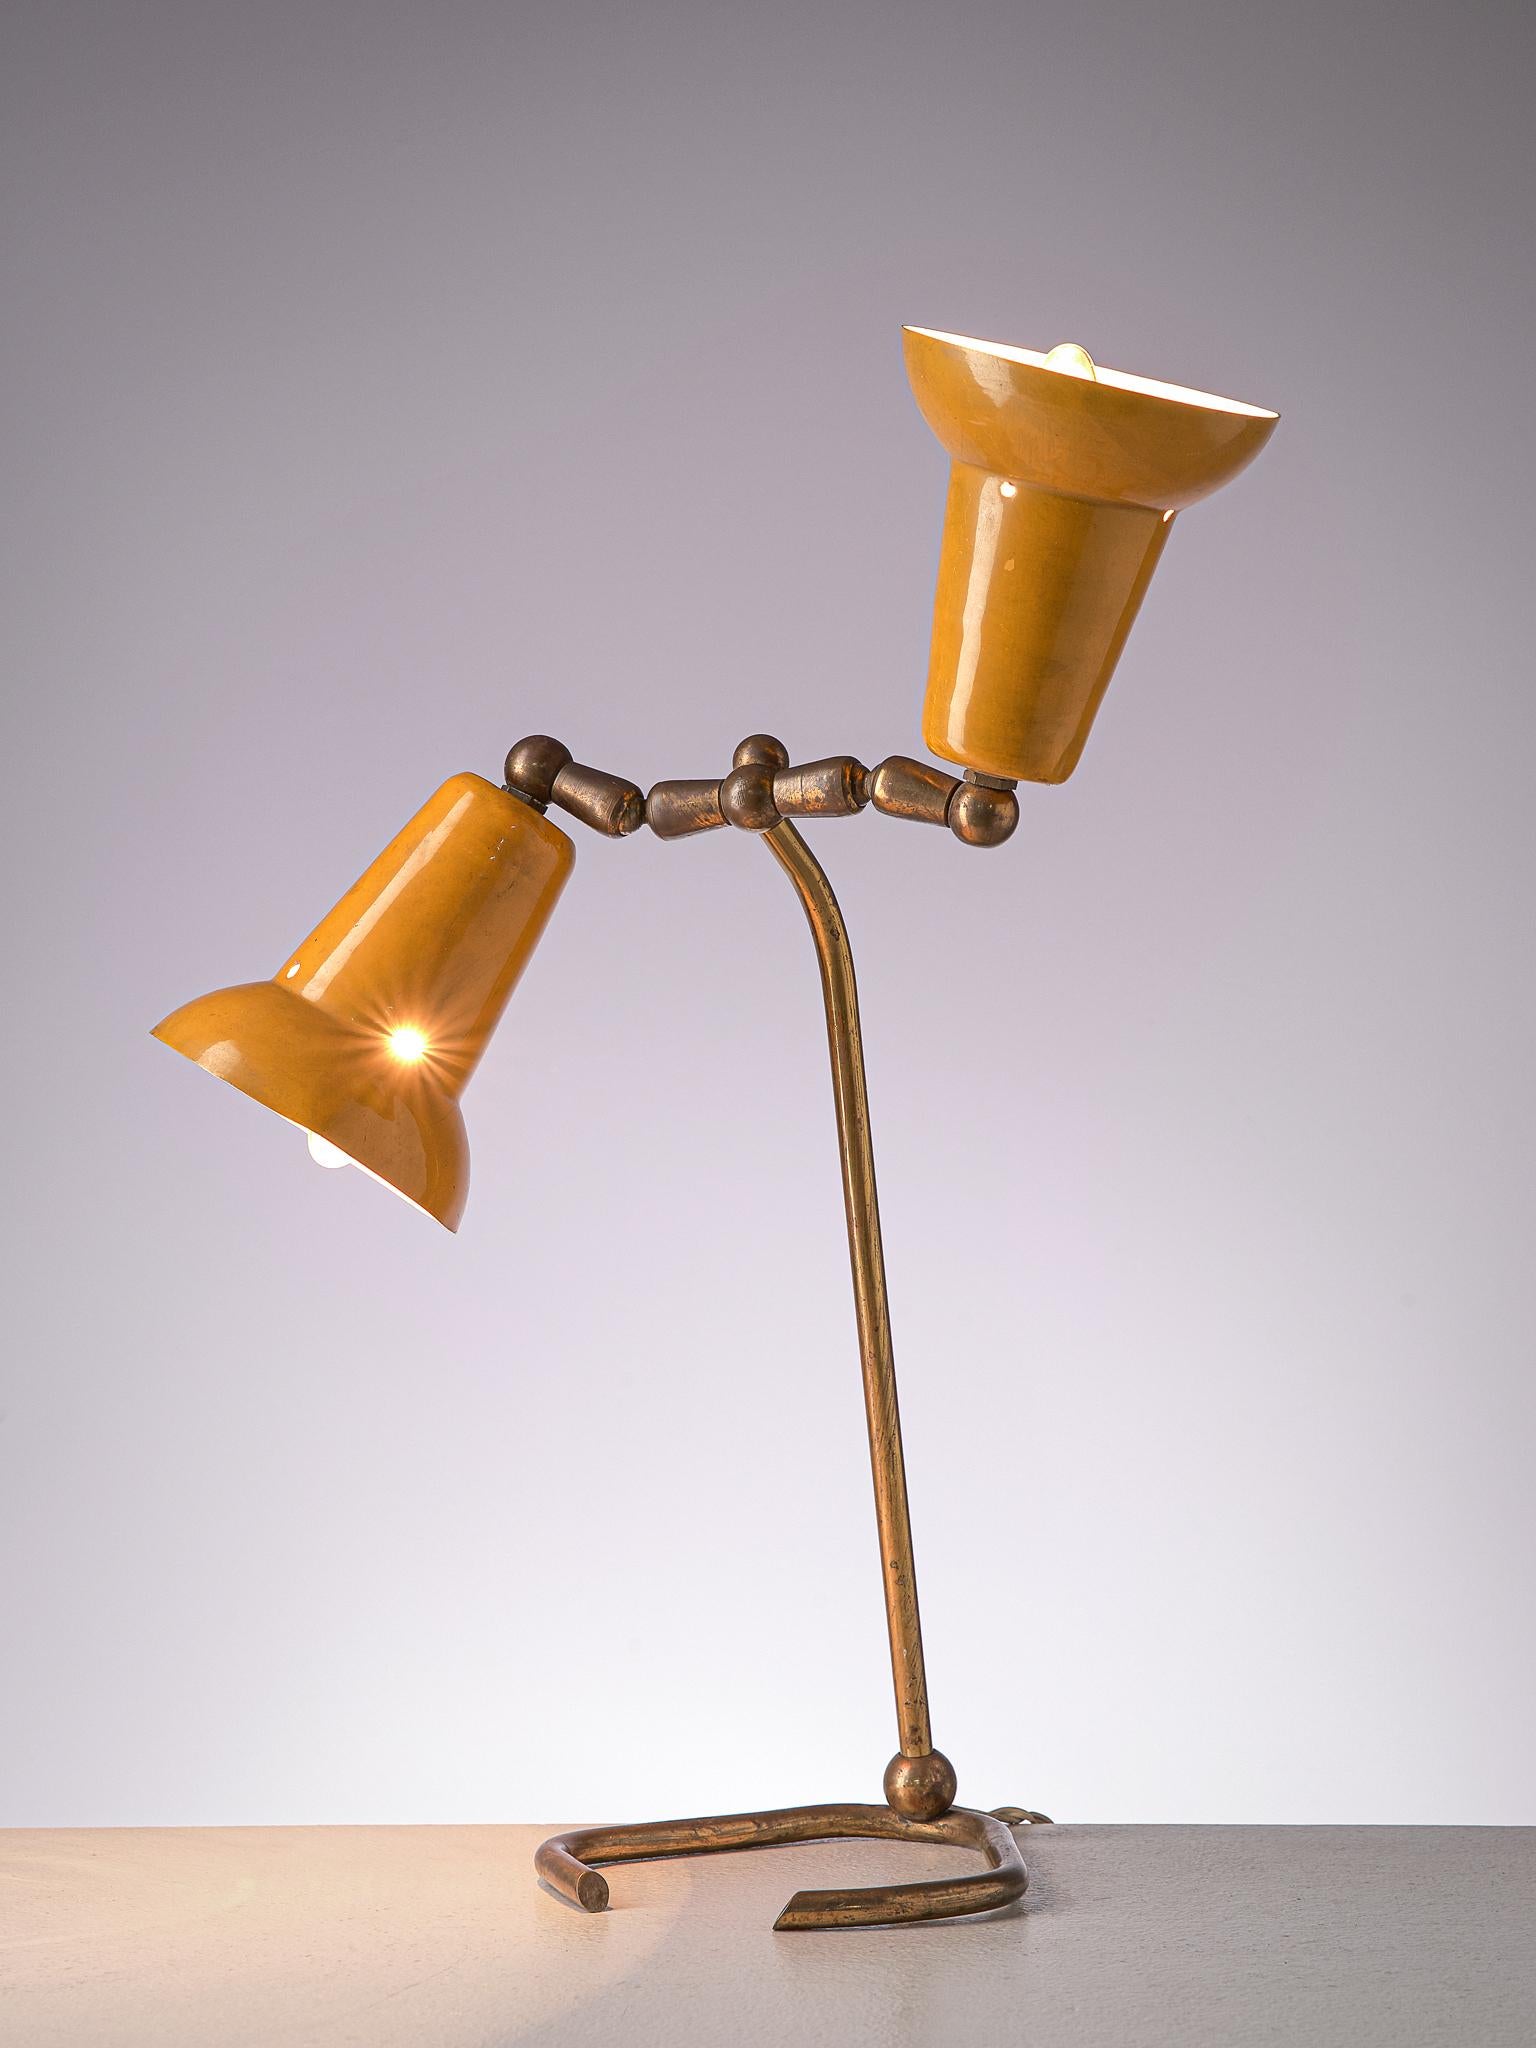 Desk light, metal and brass, Italy, 1960s

Simplistic, yet playful table lamp from Italy. The lamp features a brass, tubular foot and stem, which ends in two arms that each hold one shade. The arms are  The metal shades are lacquered in ochre yellow